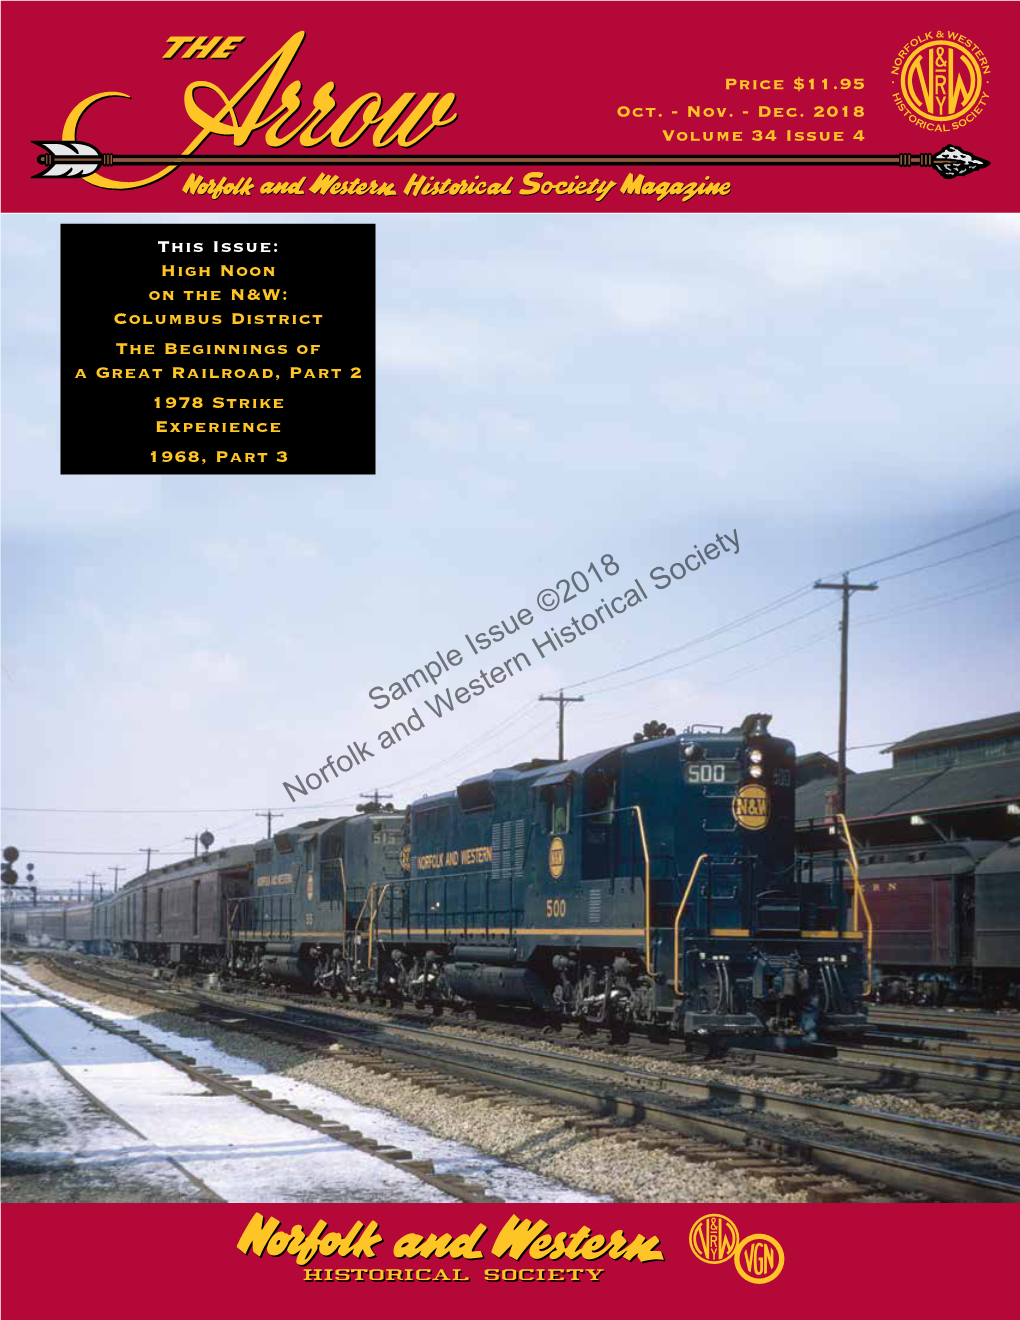 Sample Issue ©2018 Norfolk and Western Historical Society